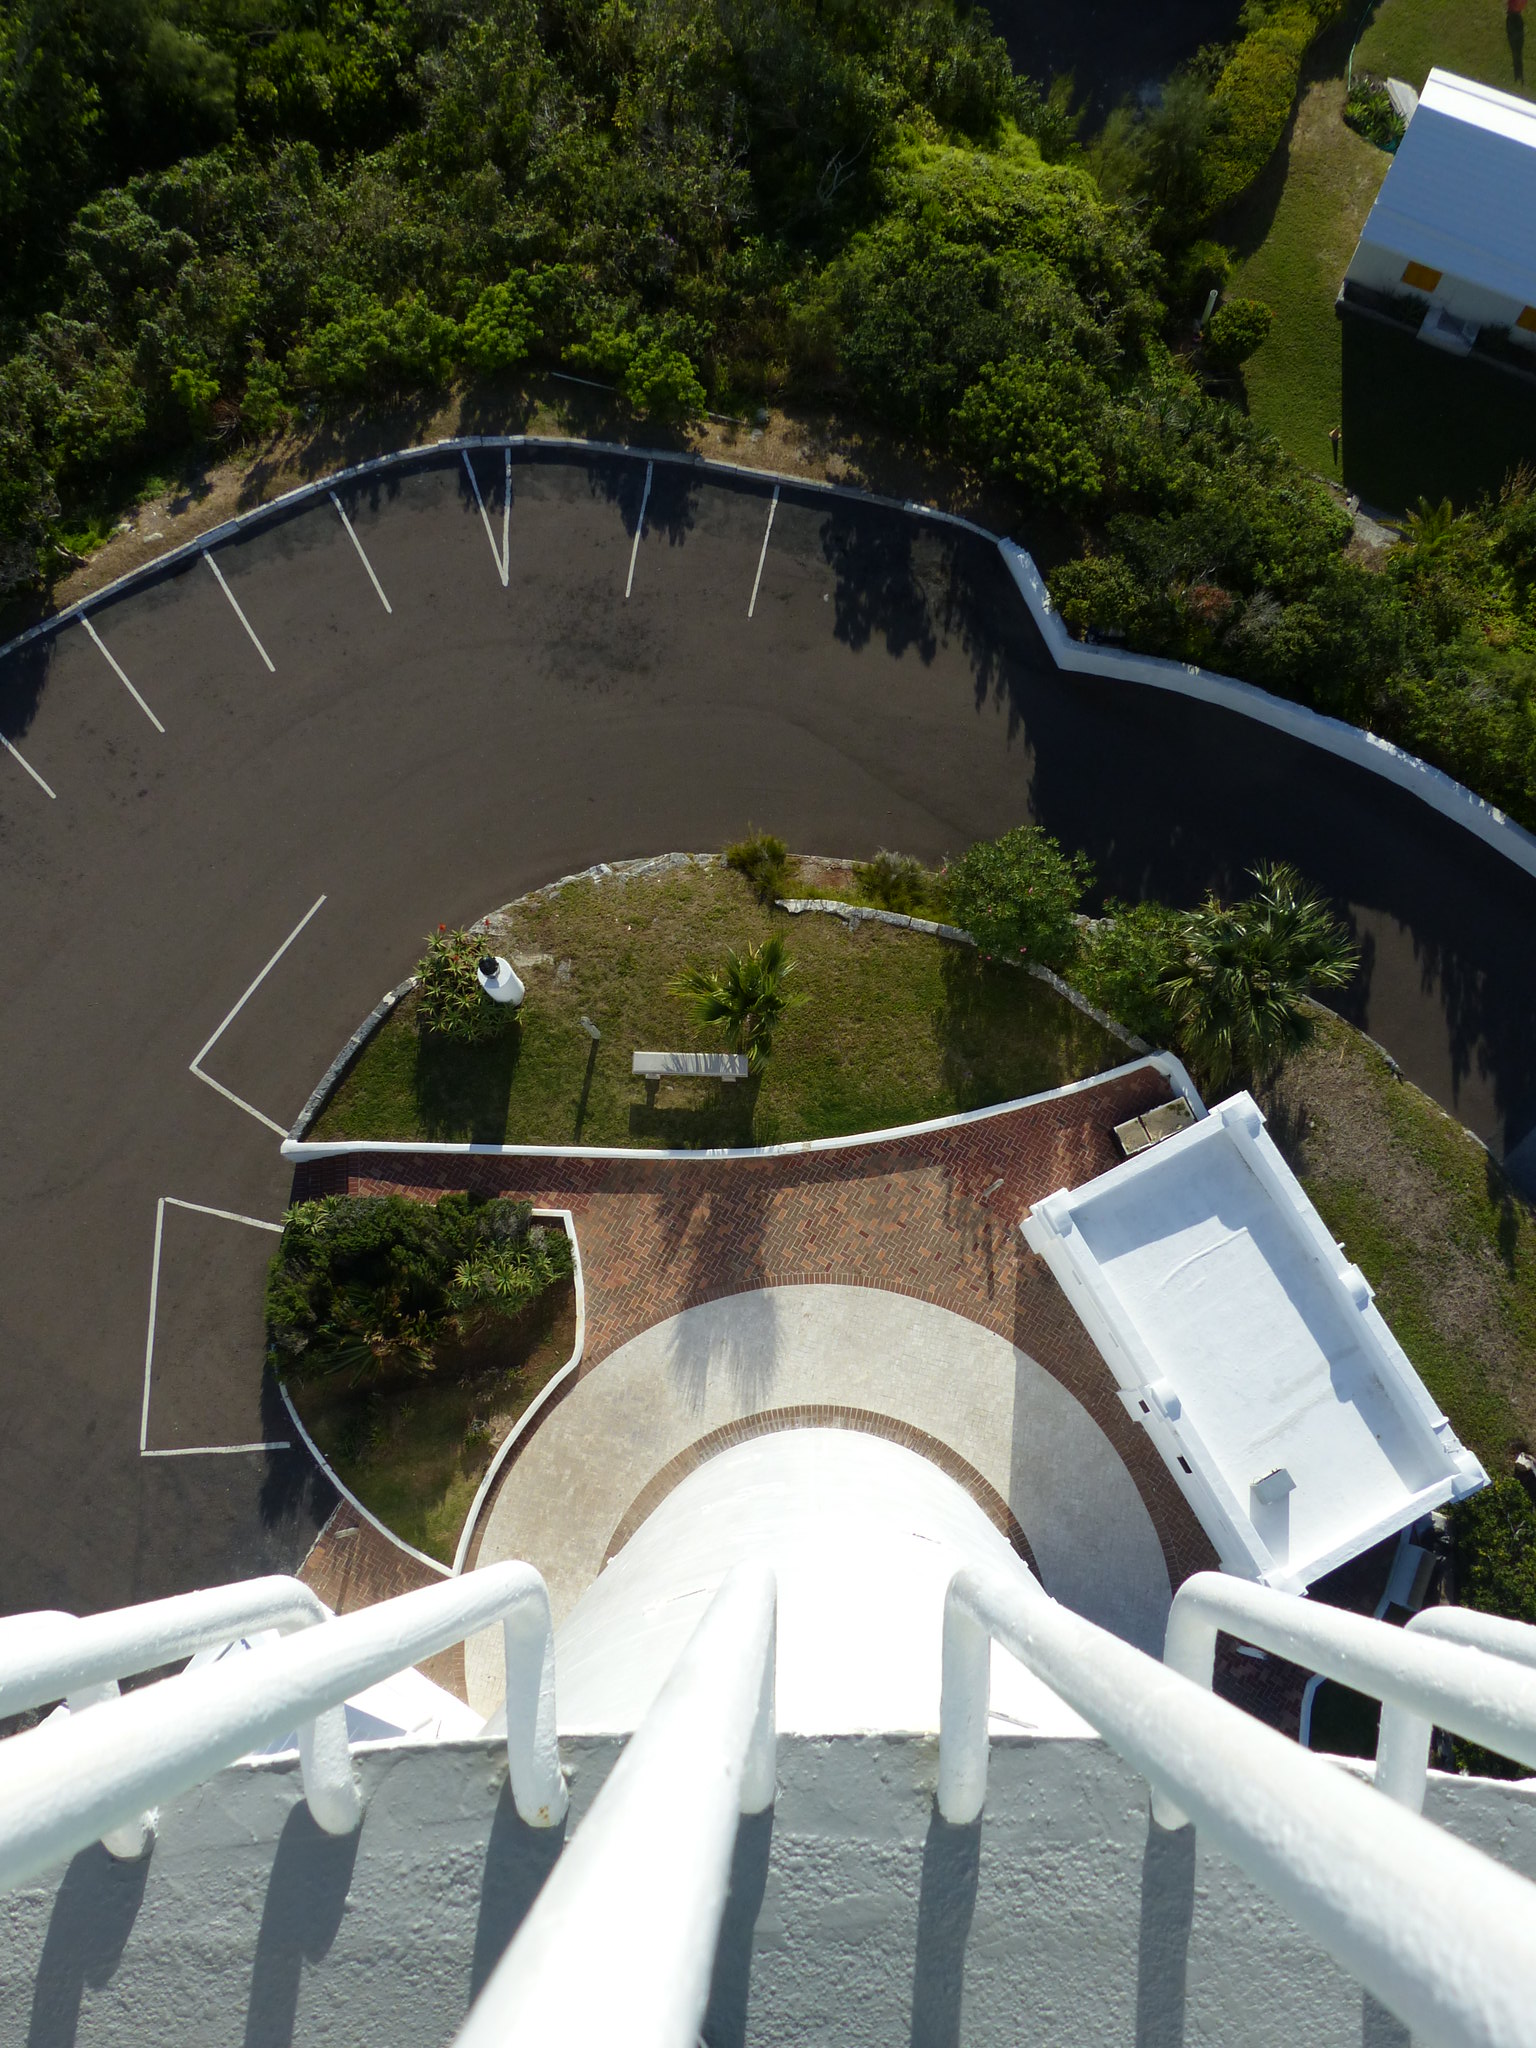 View looking down from the Gibbs Hill Lighthouse.